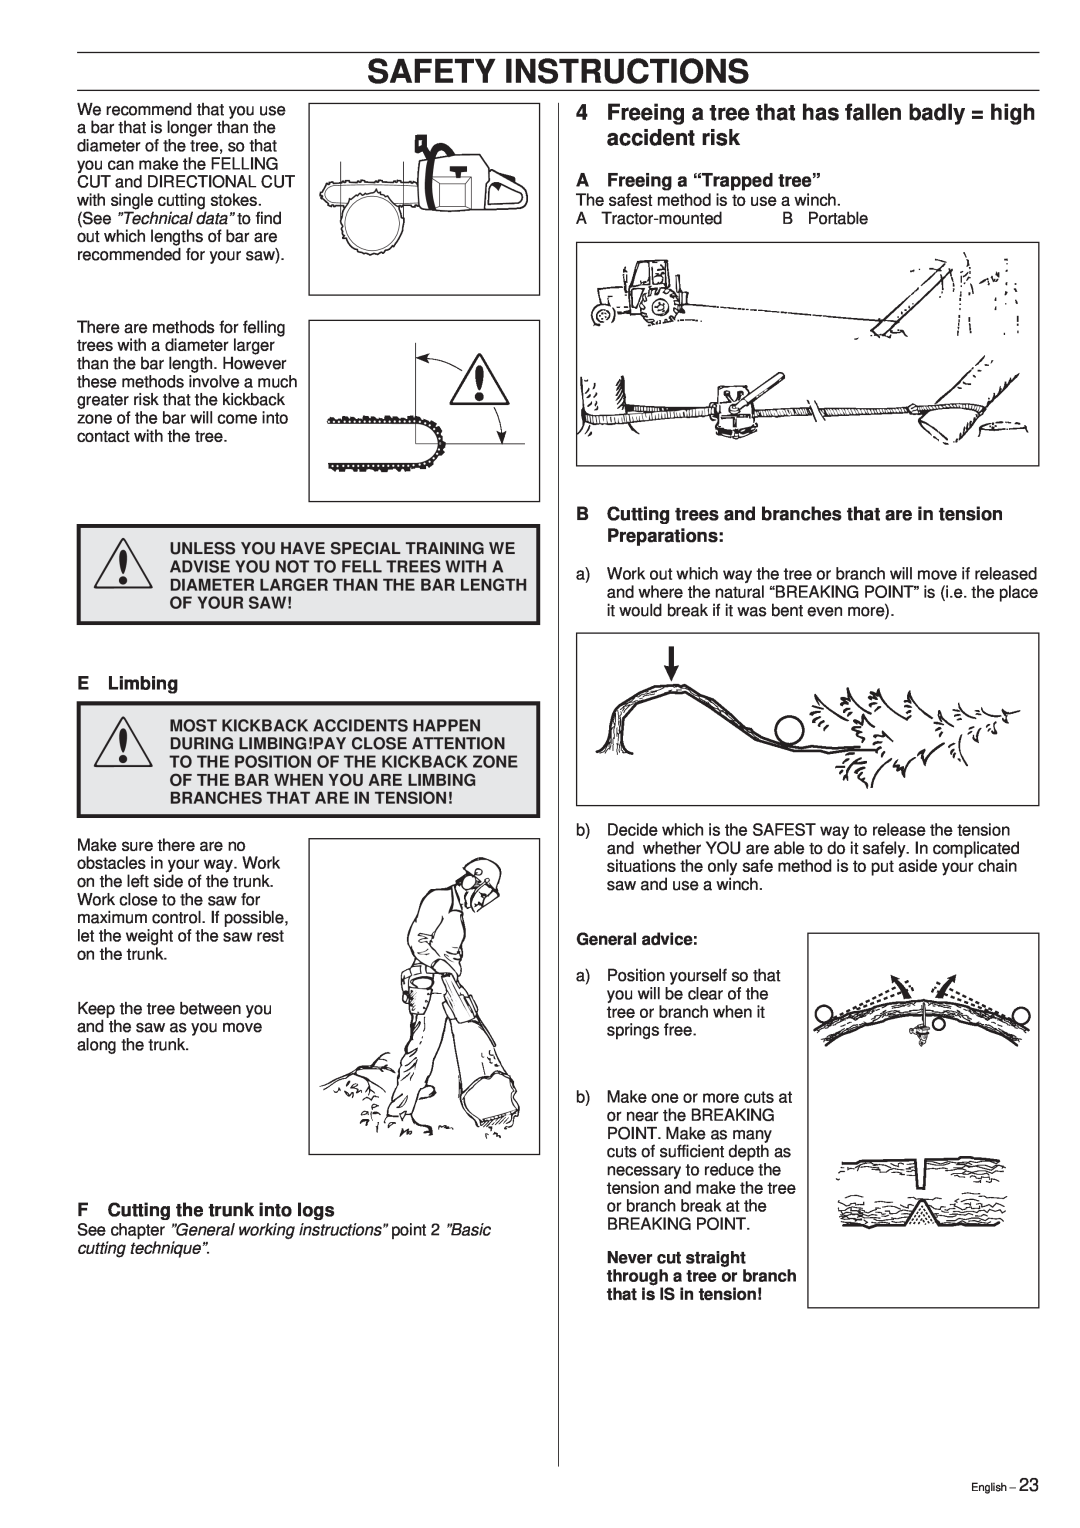 Husqvarna 261 manual Safety Instructions, Freeing a tree that has fallen badly = high accident risk, E Limbing 